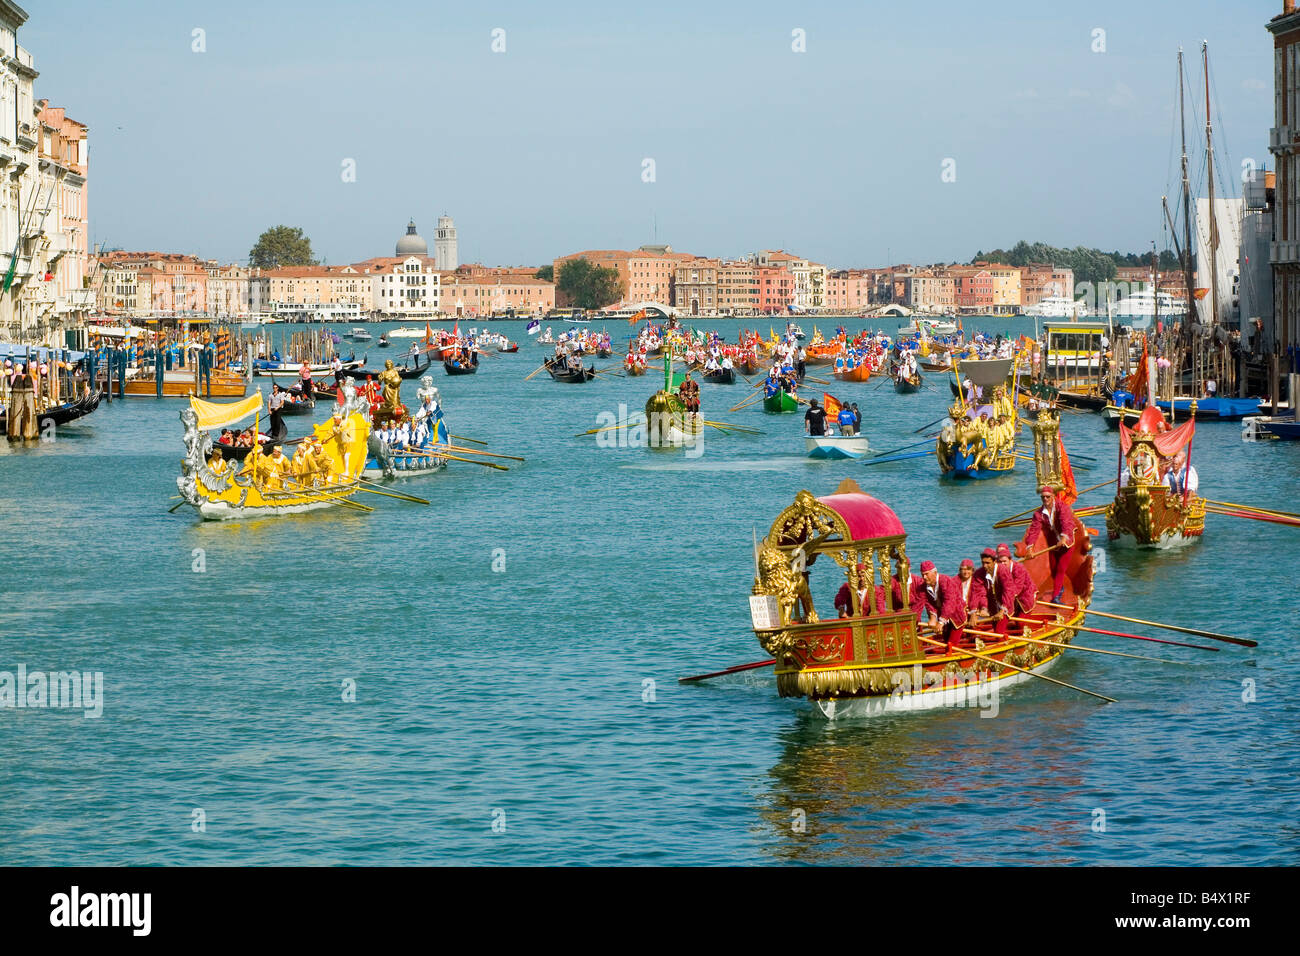 Decorated Boats on the Grand Canal in Venice for the Historical Regatta which takes place each September Stock Photo